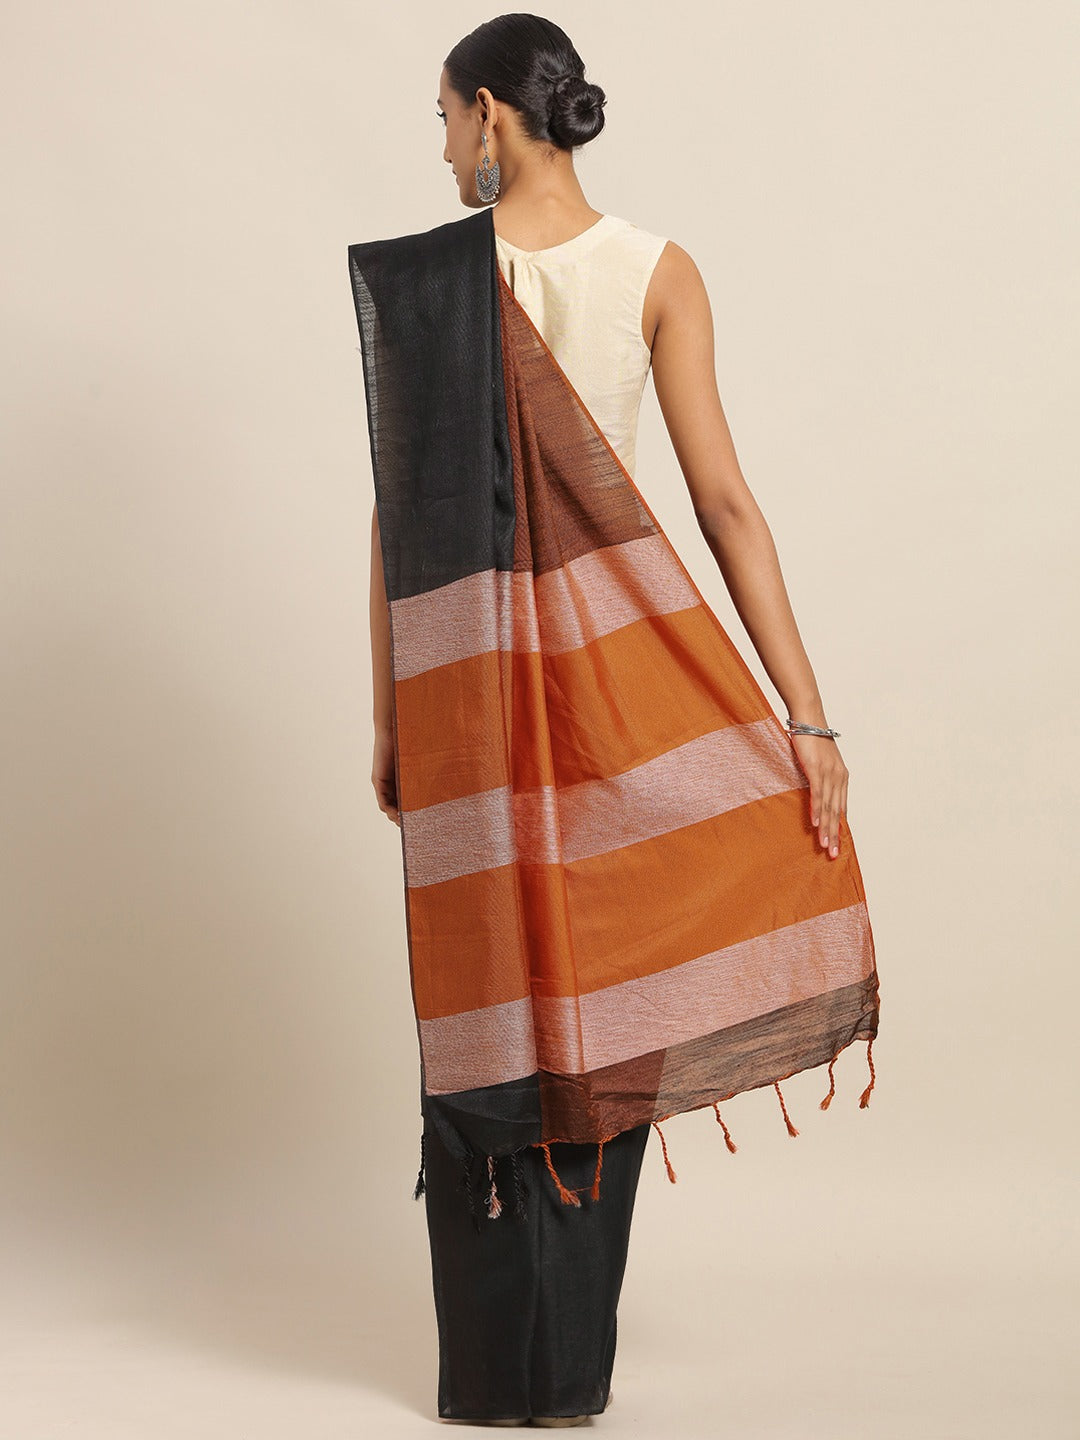  Stylish Brown Colour Linen Blend Saree with Woven Design